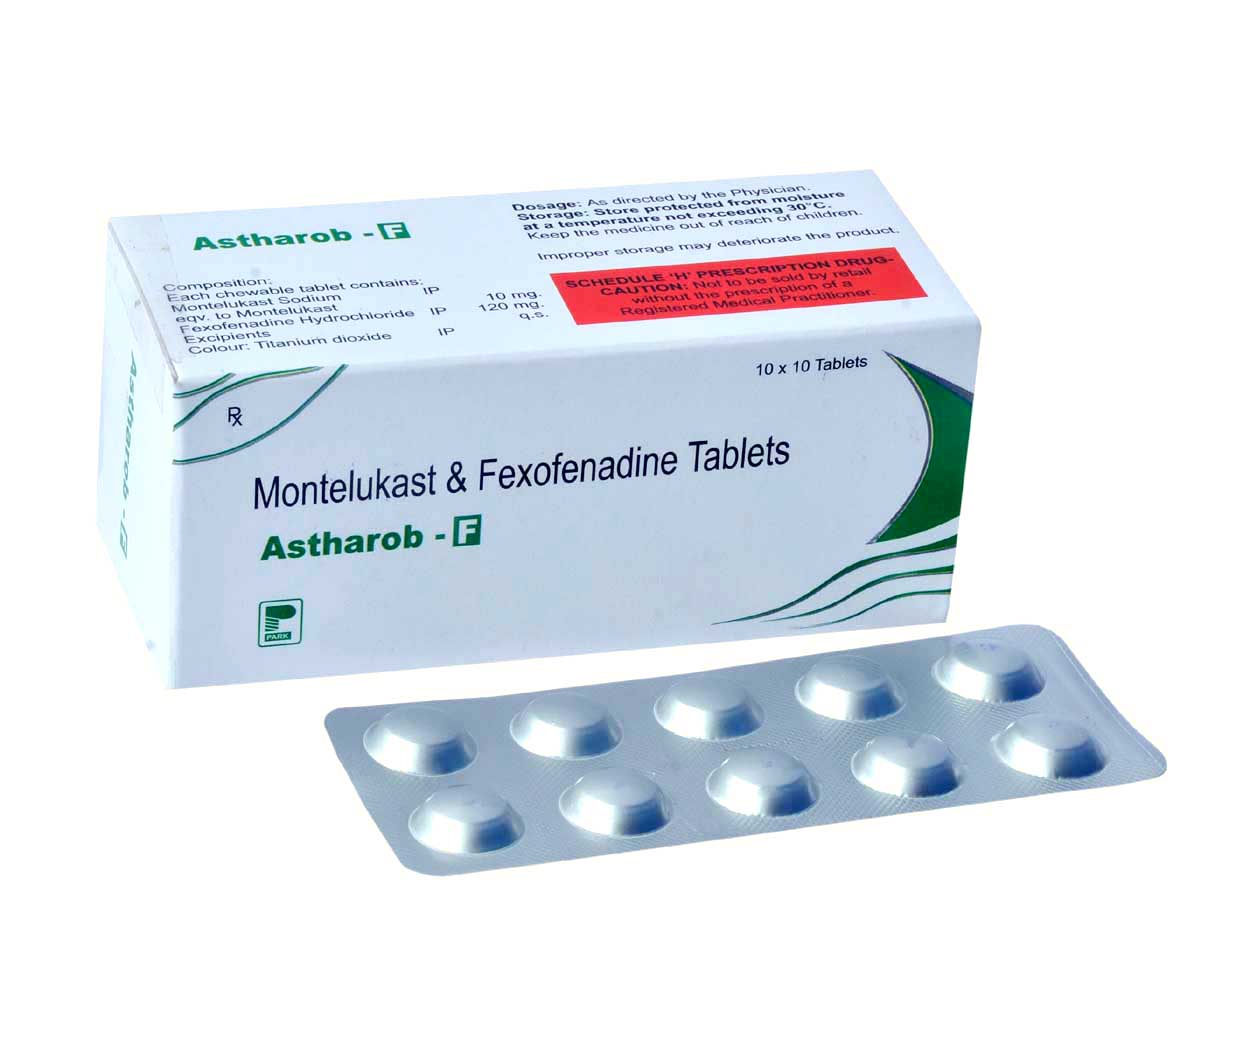 Product Name: Astharob F, Compositions of Astharob F are Montelukast & Fexofenadine Tablets - Park Pharmaceuticals